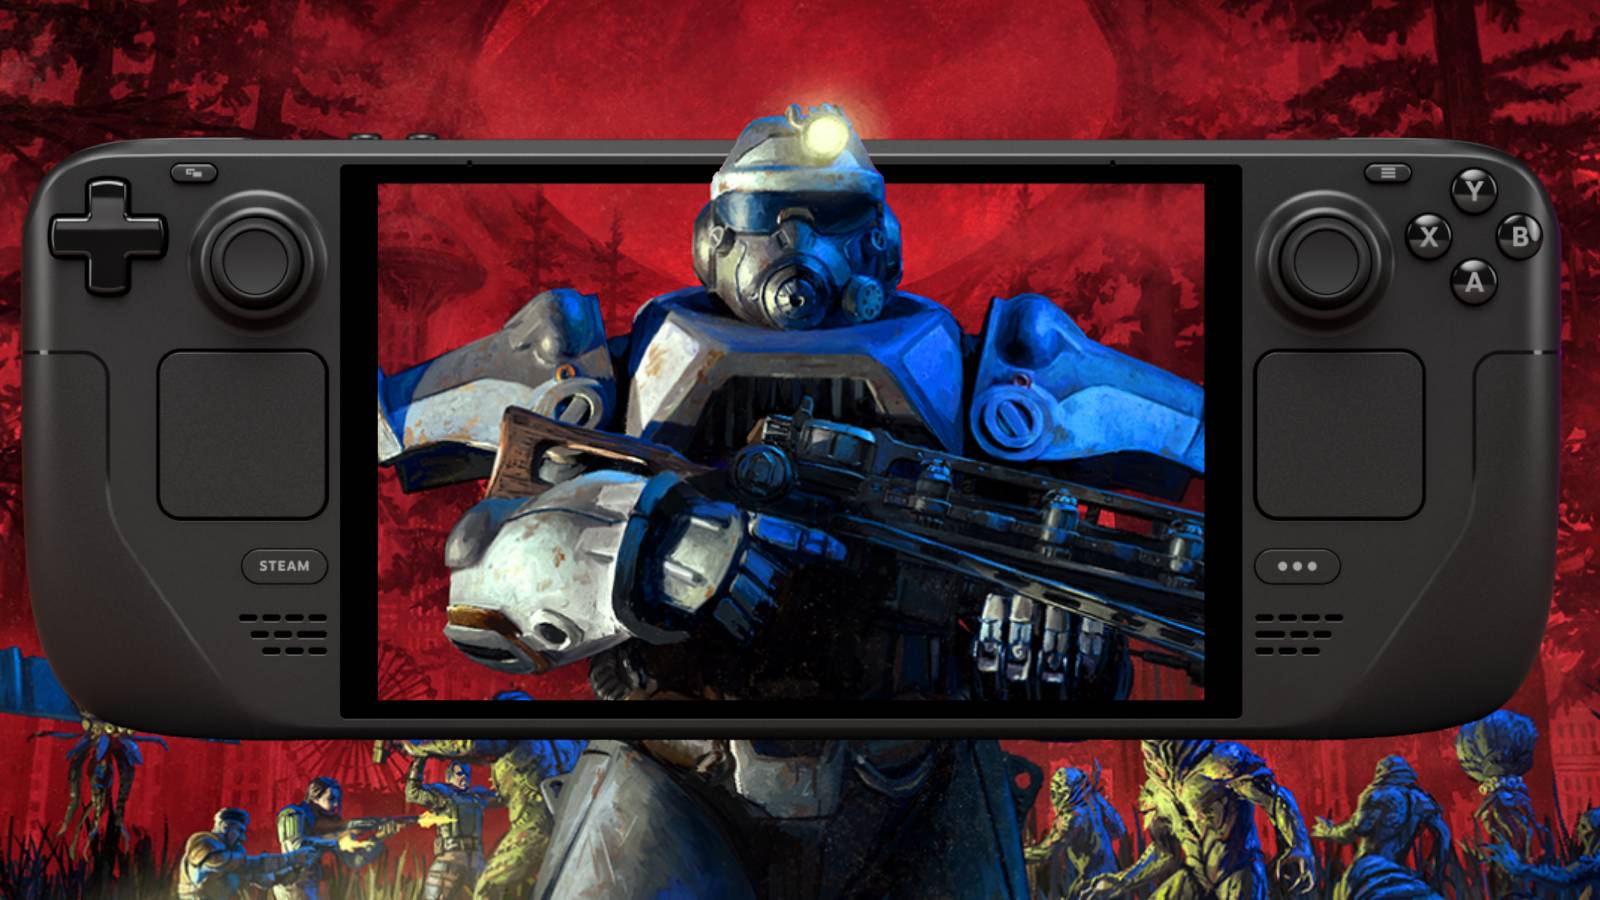 Key-art from Fallout 76 on the screen of a Steam Deck.